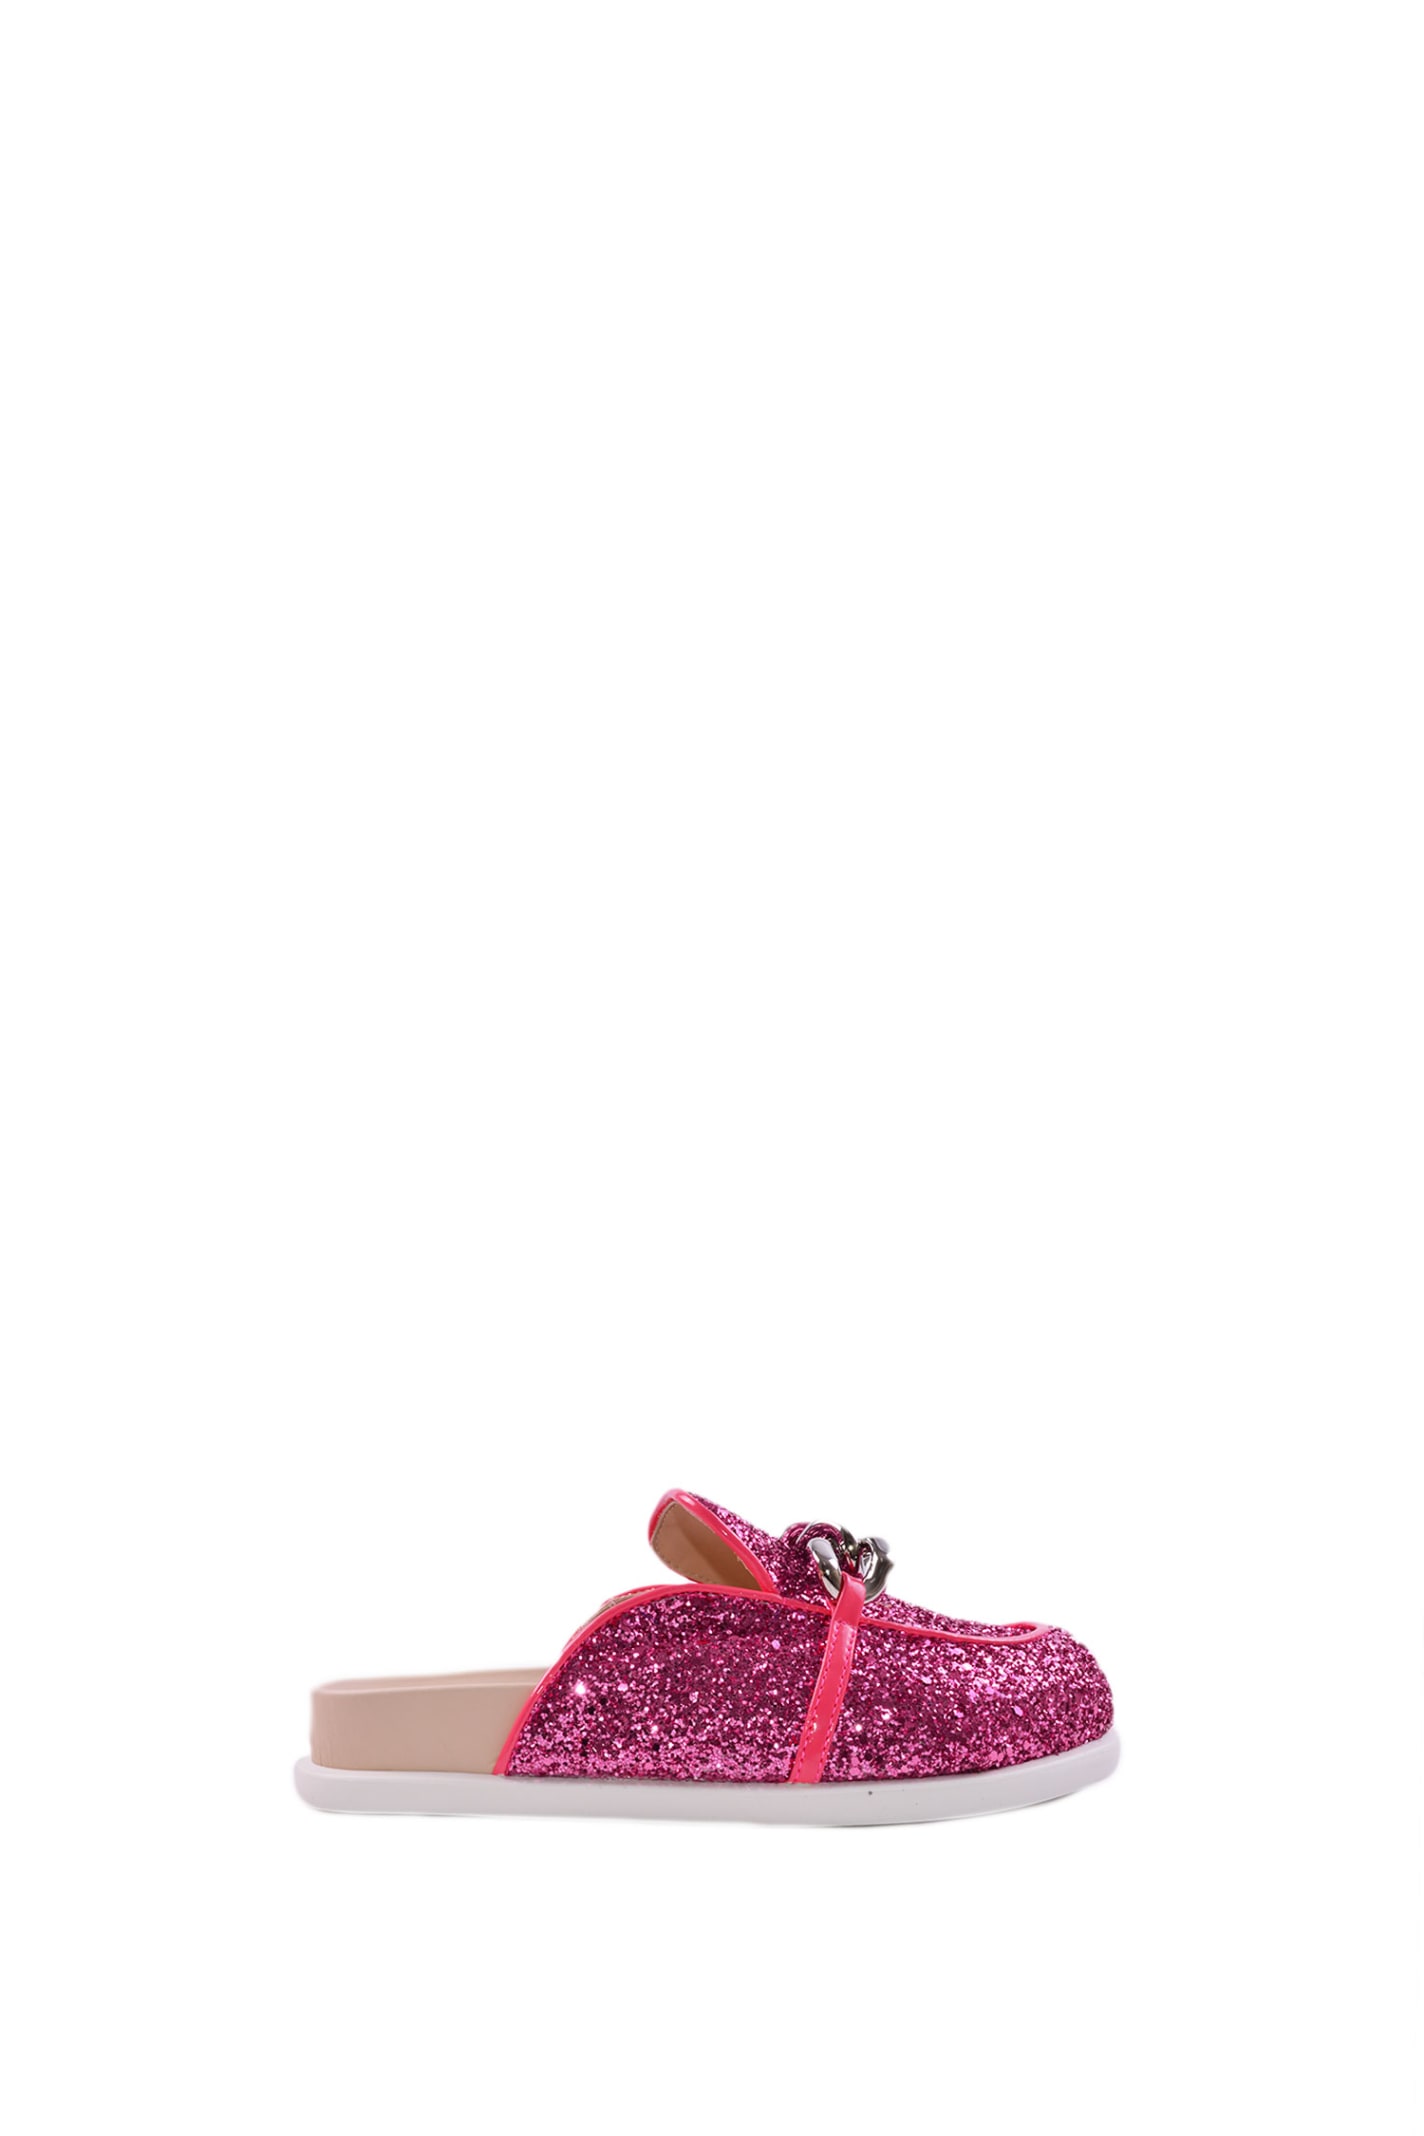 N°21 Kids' Sandals With Glitter In Rose